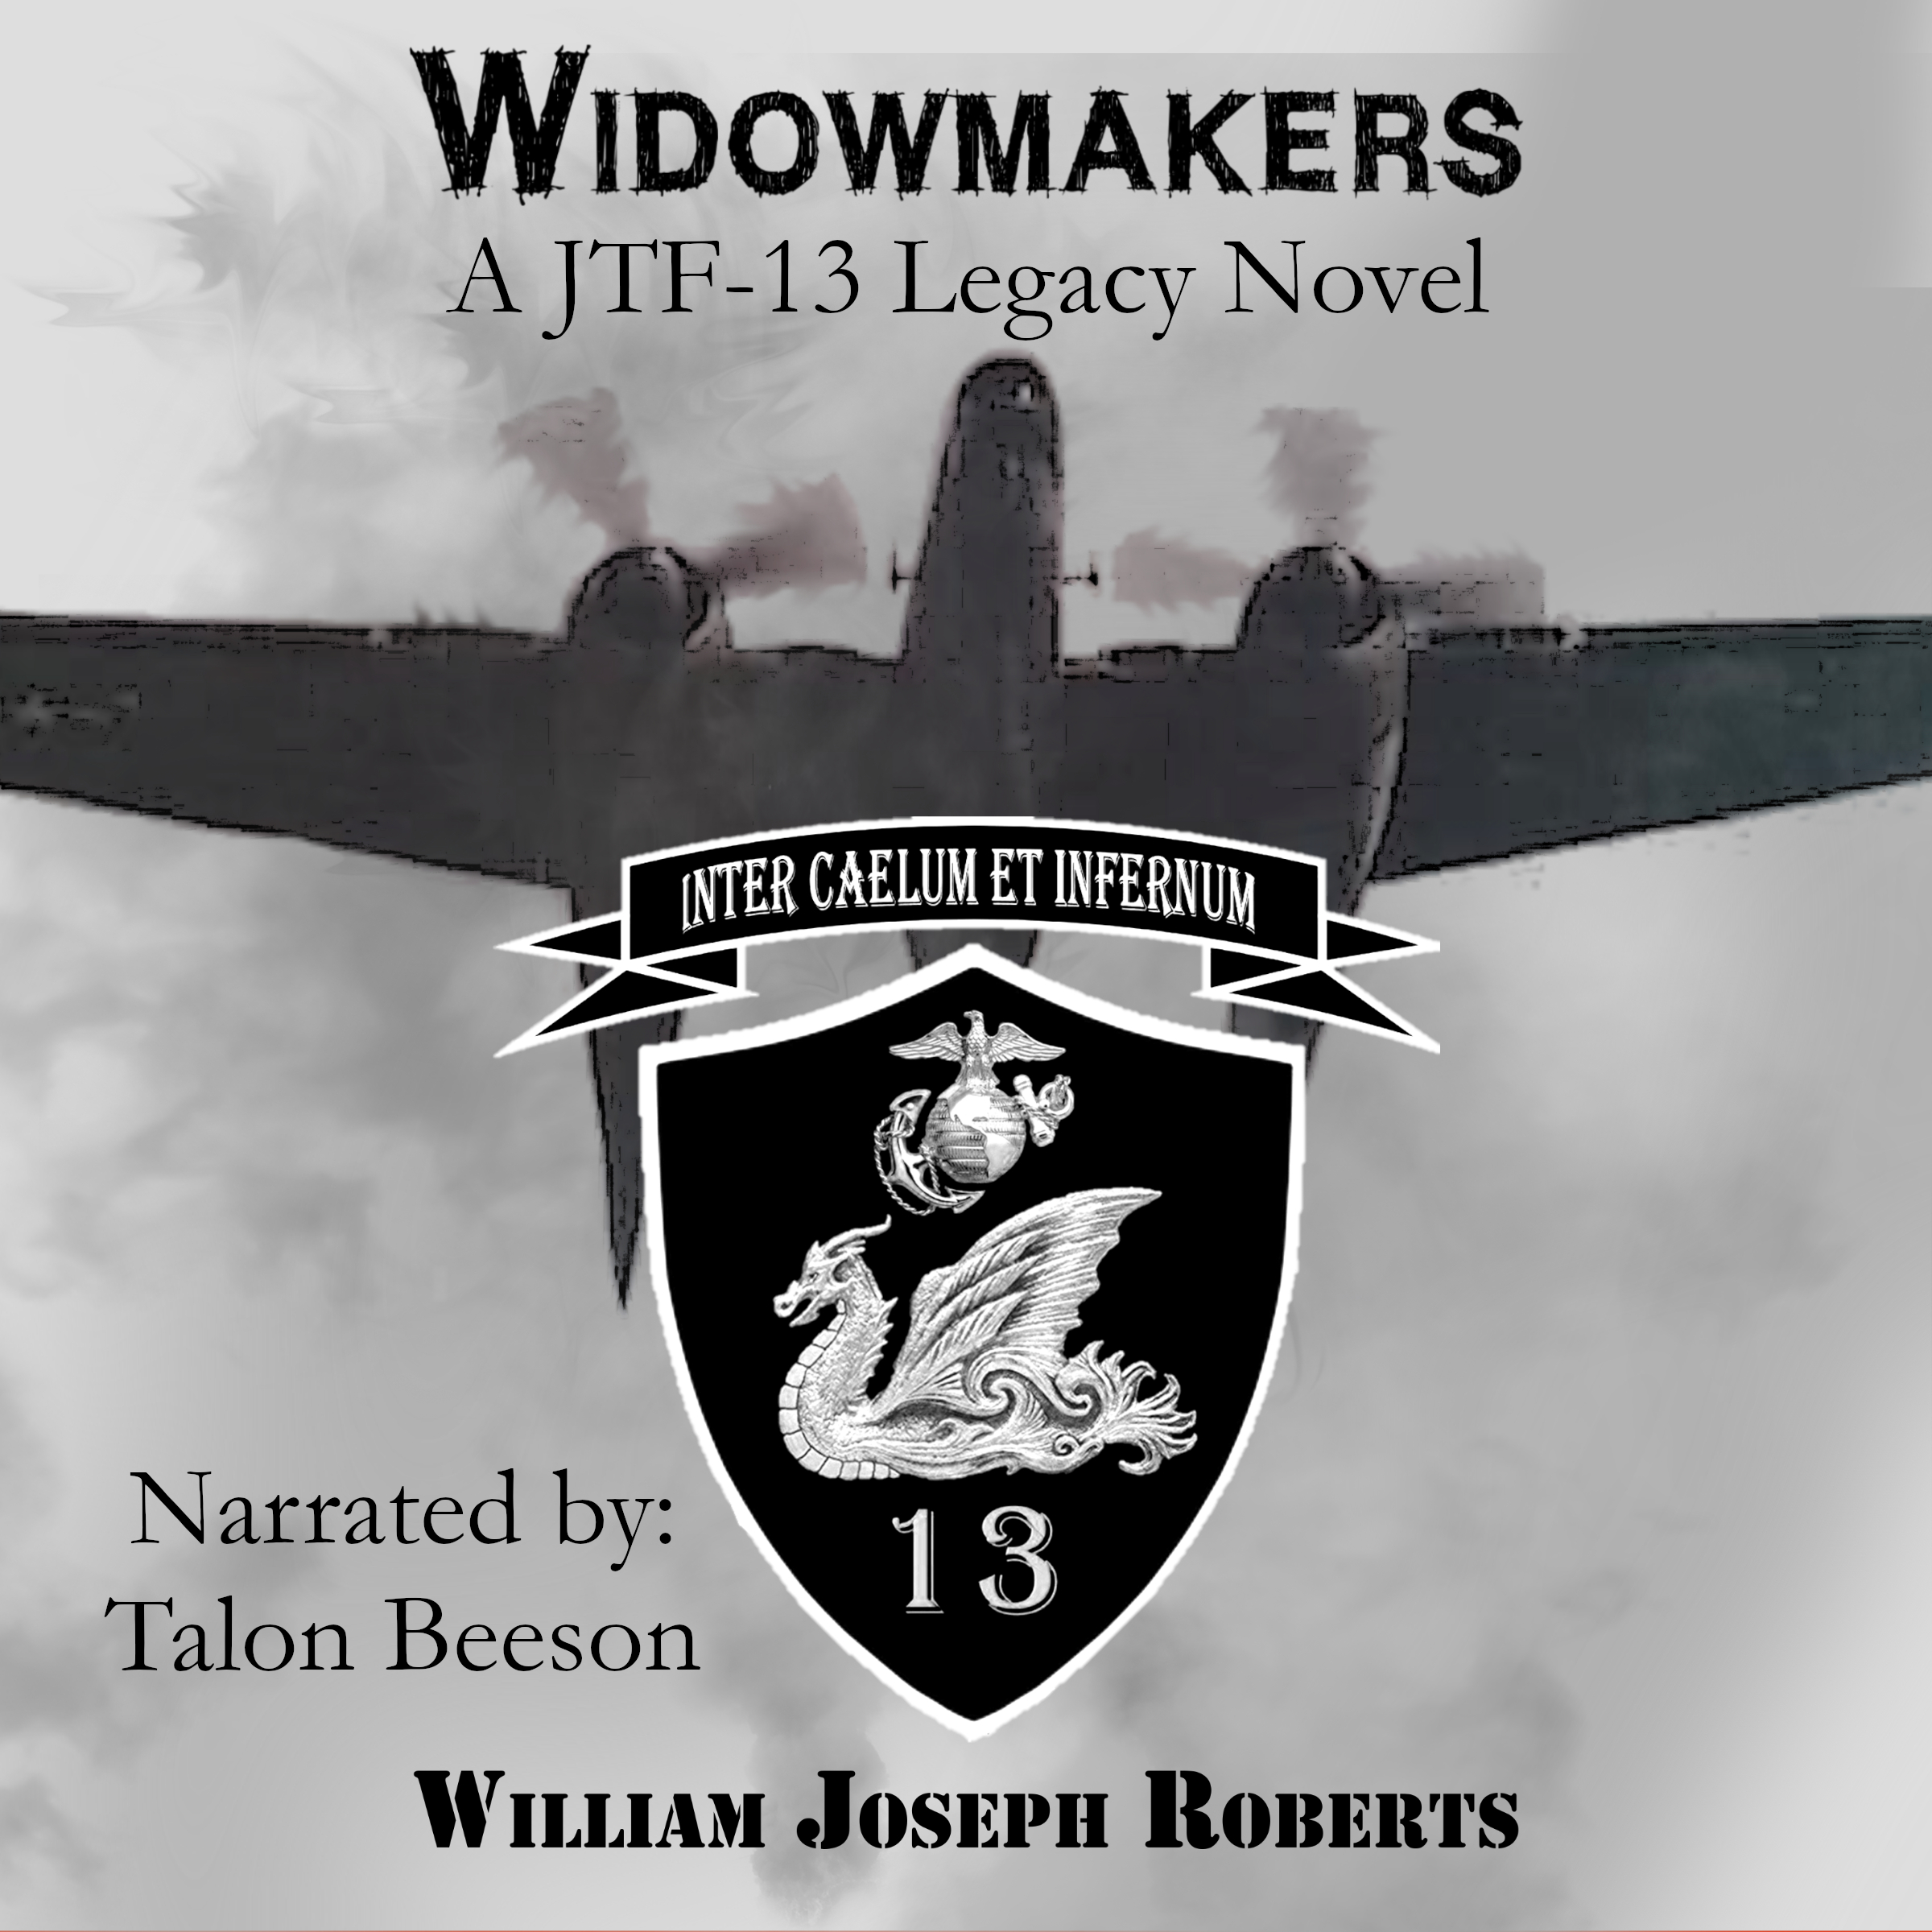 Are you ready for the next JTF-13 audio? Widowmakers, A JTF-13 Novel is now available on Audible! Plus an open call for JTF-13 Stories is posted.